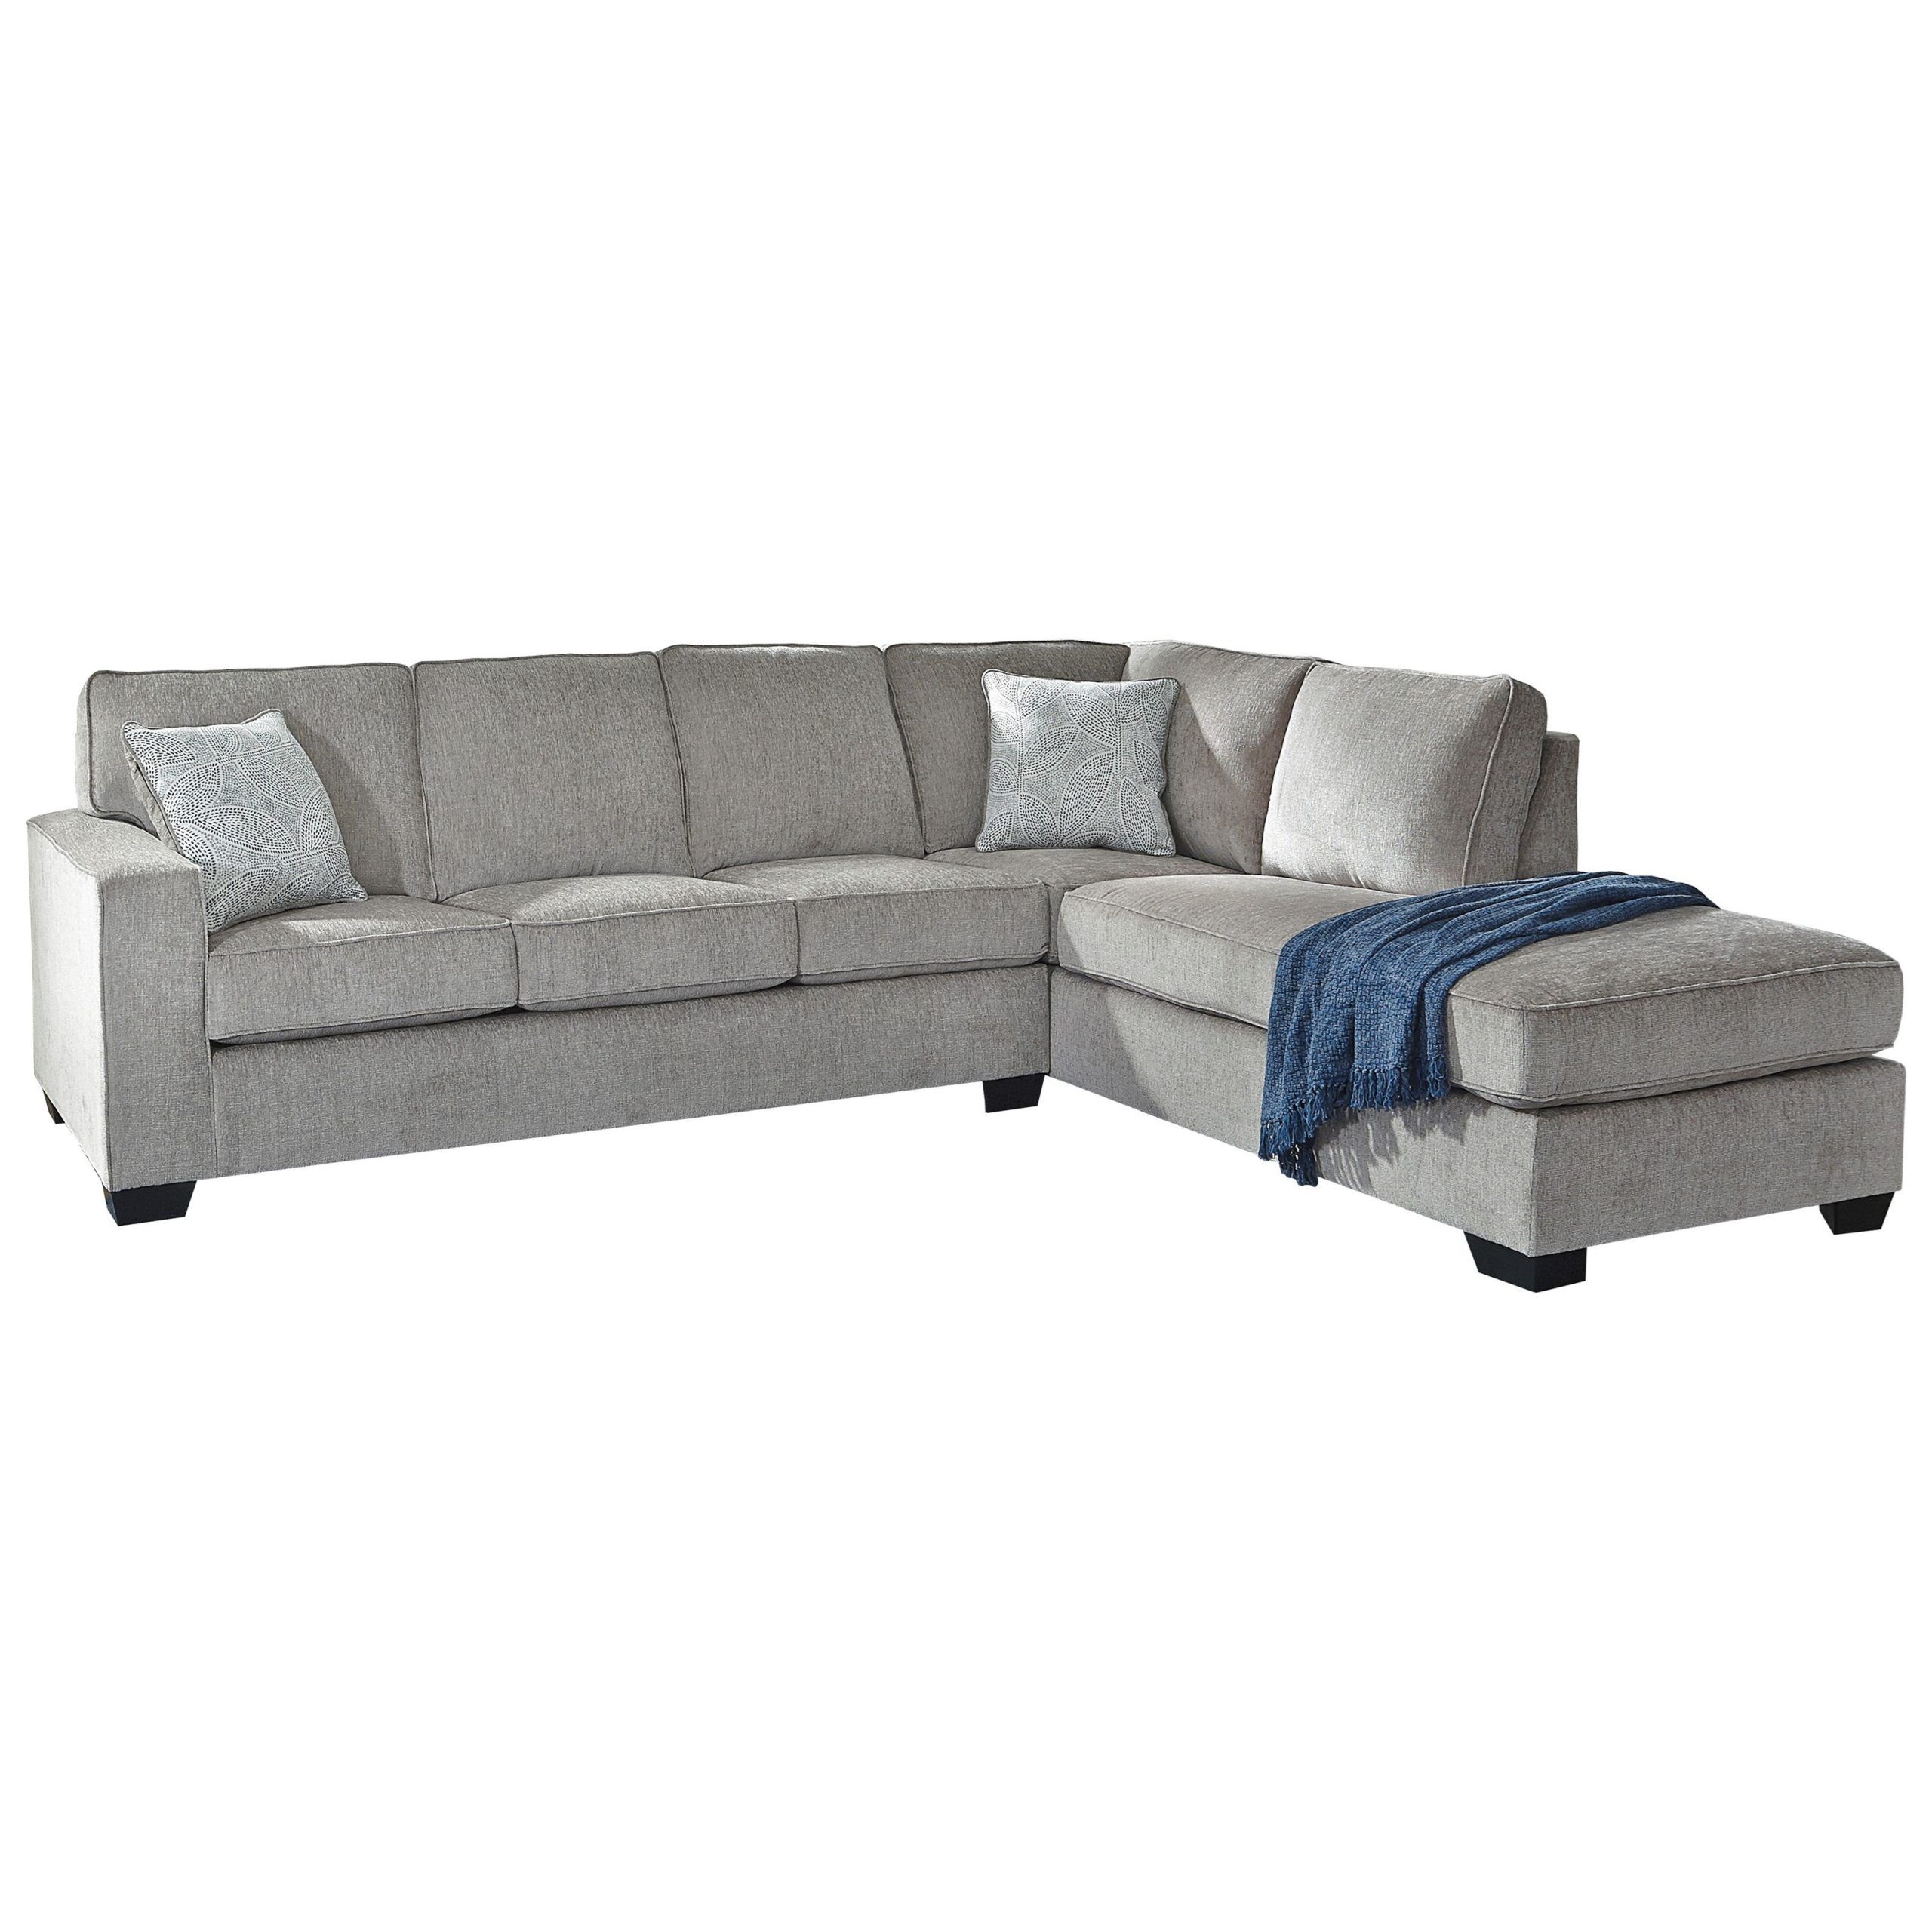 Signature Designashley Altari 123372170 2 Piece Sectional With Inside Left Or Right Facing Sleeper Sectionals (View 18 of 21)